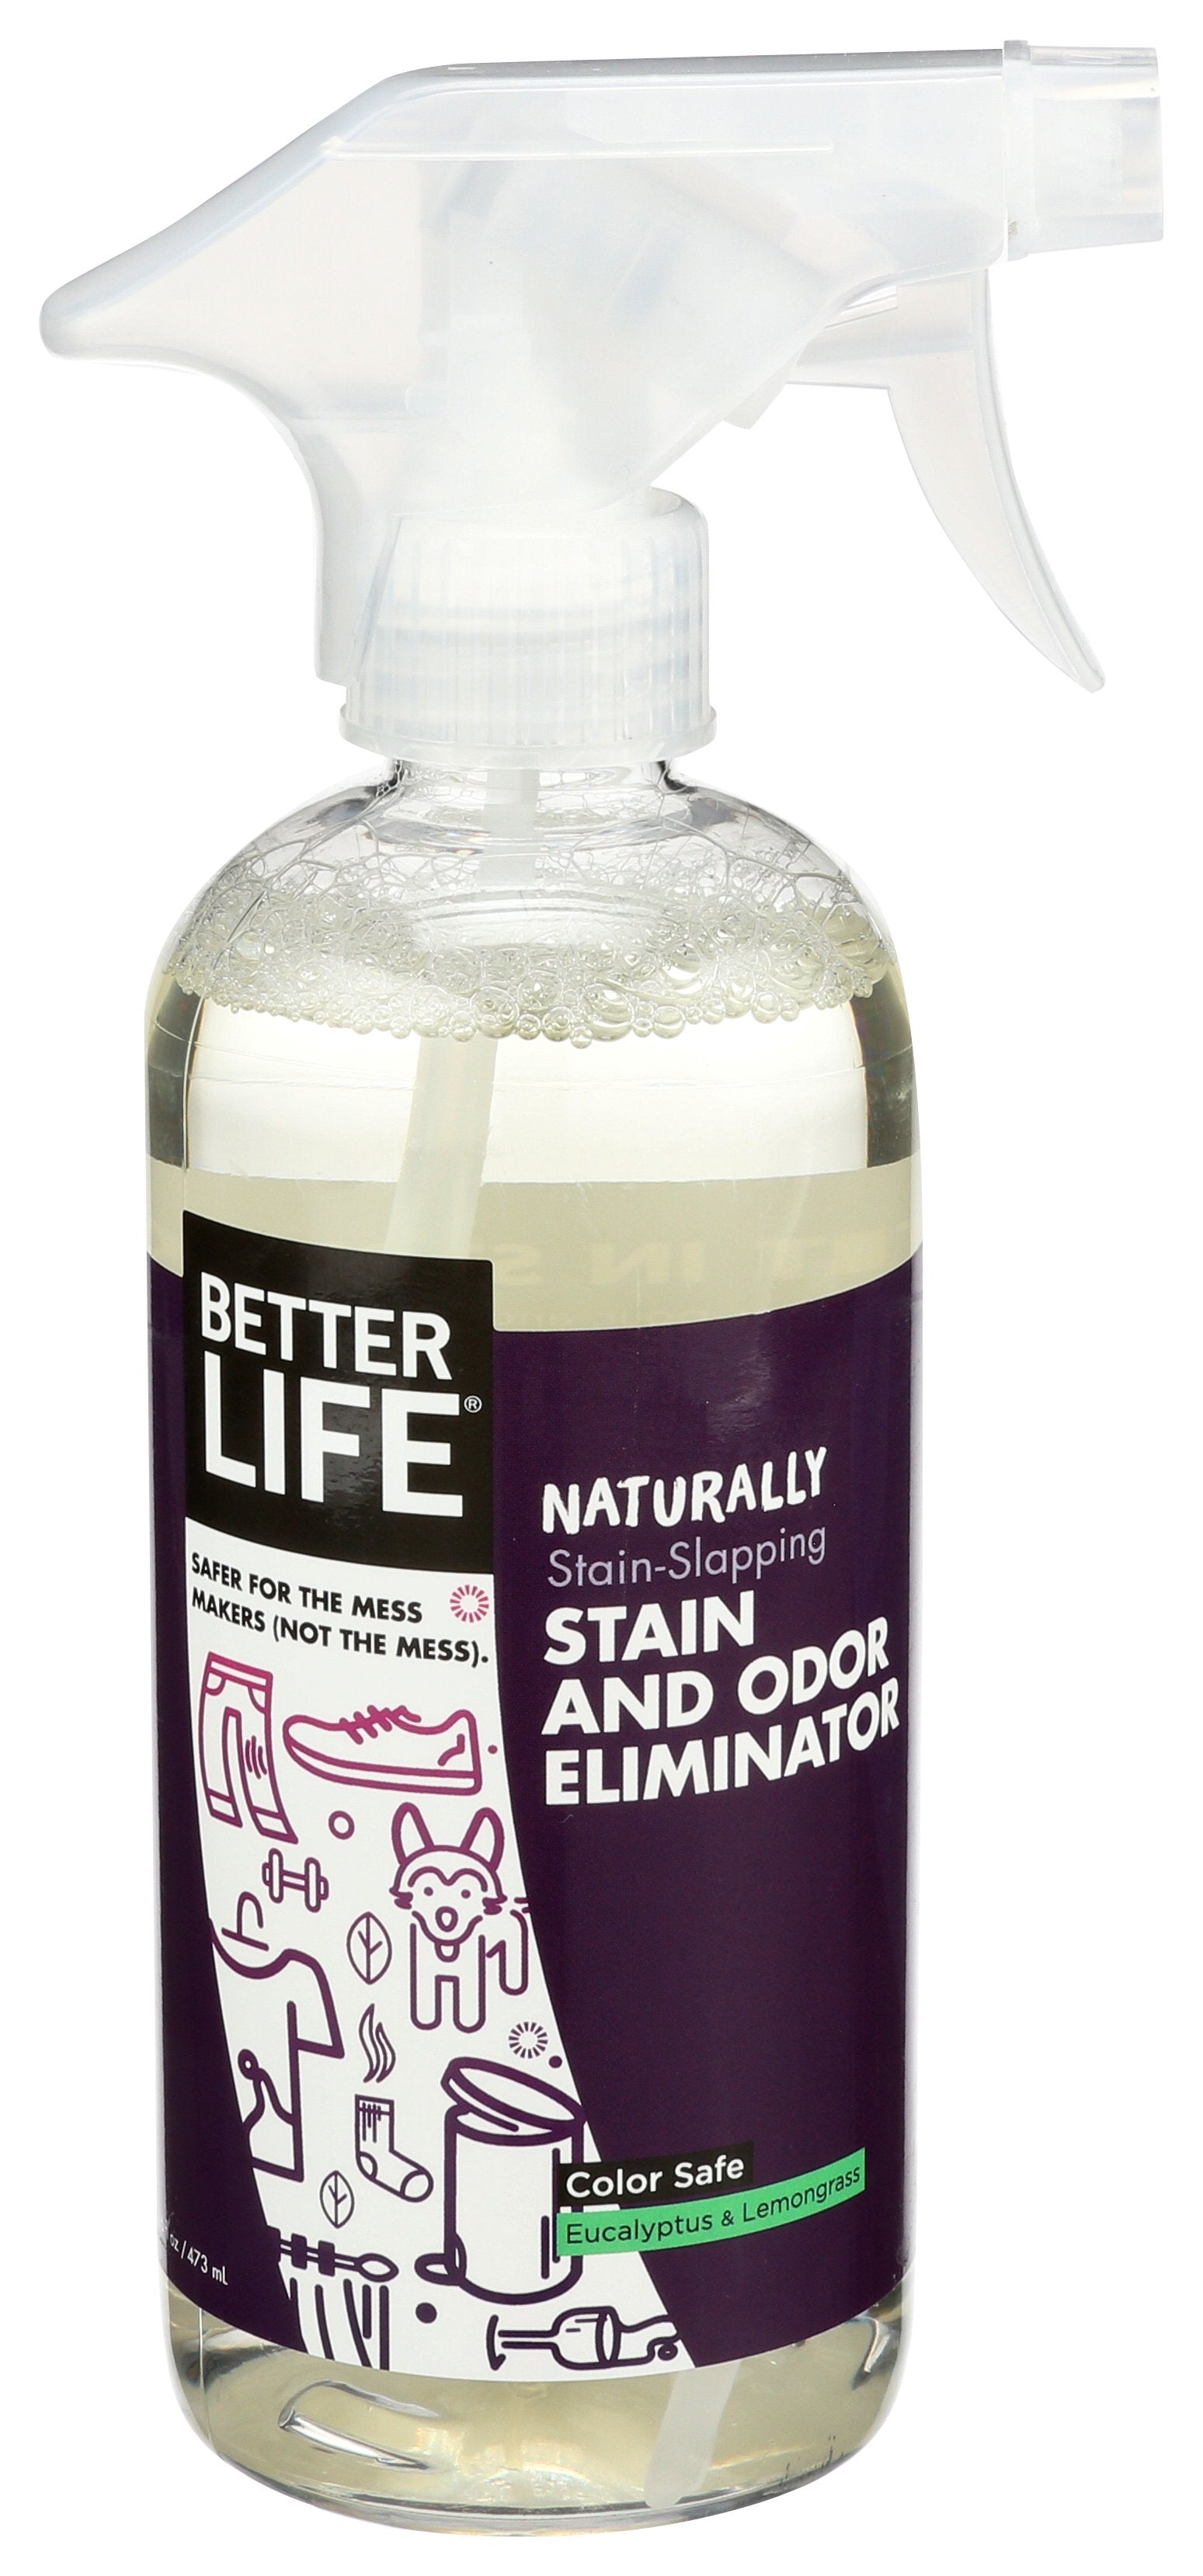 BETTER LIFE STAIN ODOR REMOVER NATL - Case of 6